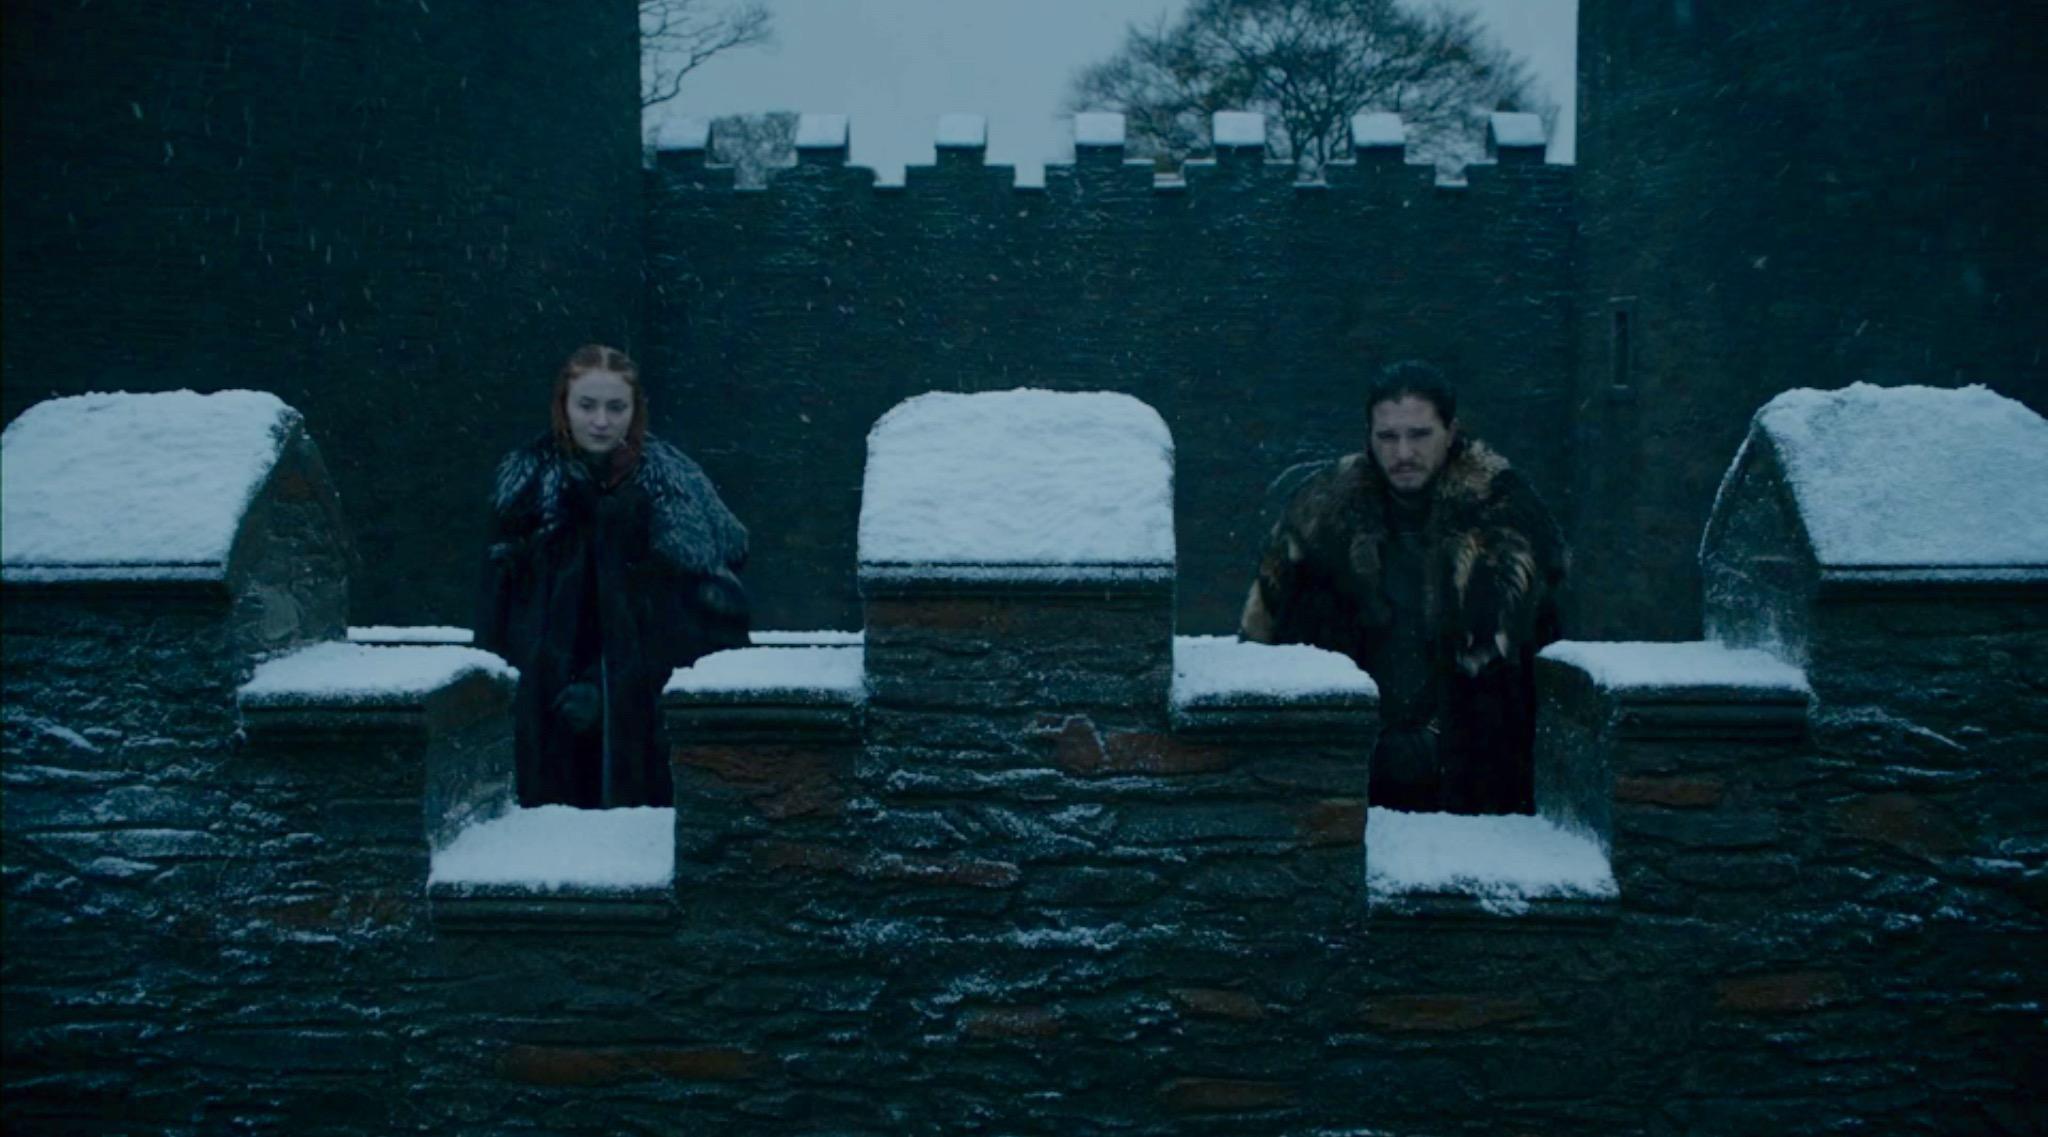 Production on Game of Thrones season seven has been delayed due to insufficiently wintry conditions